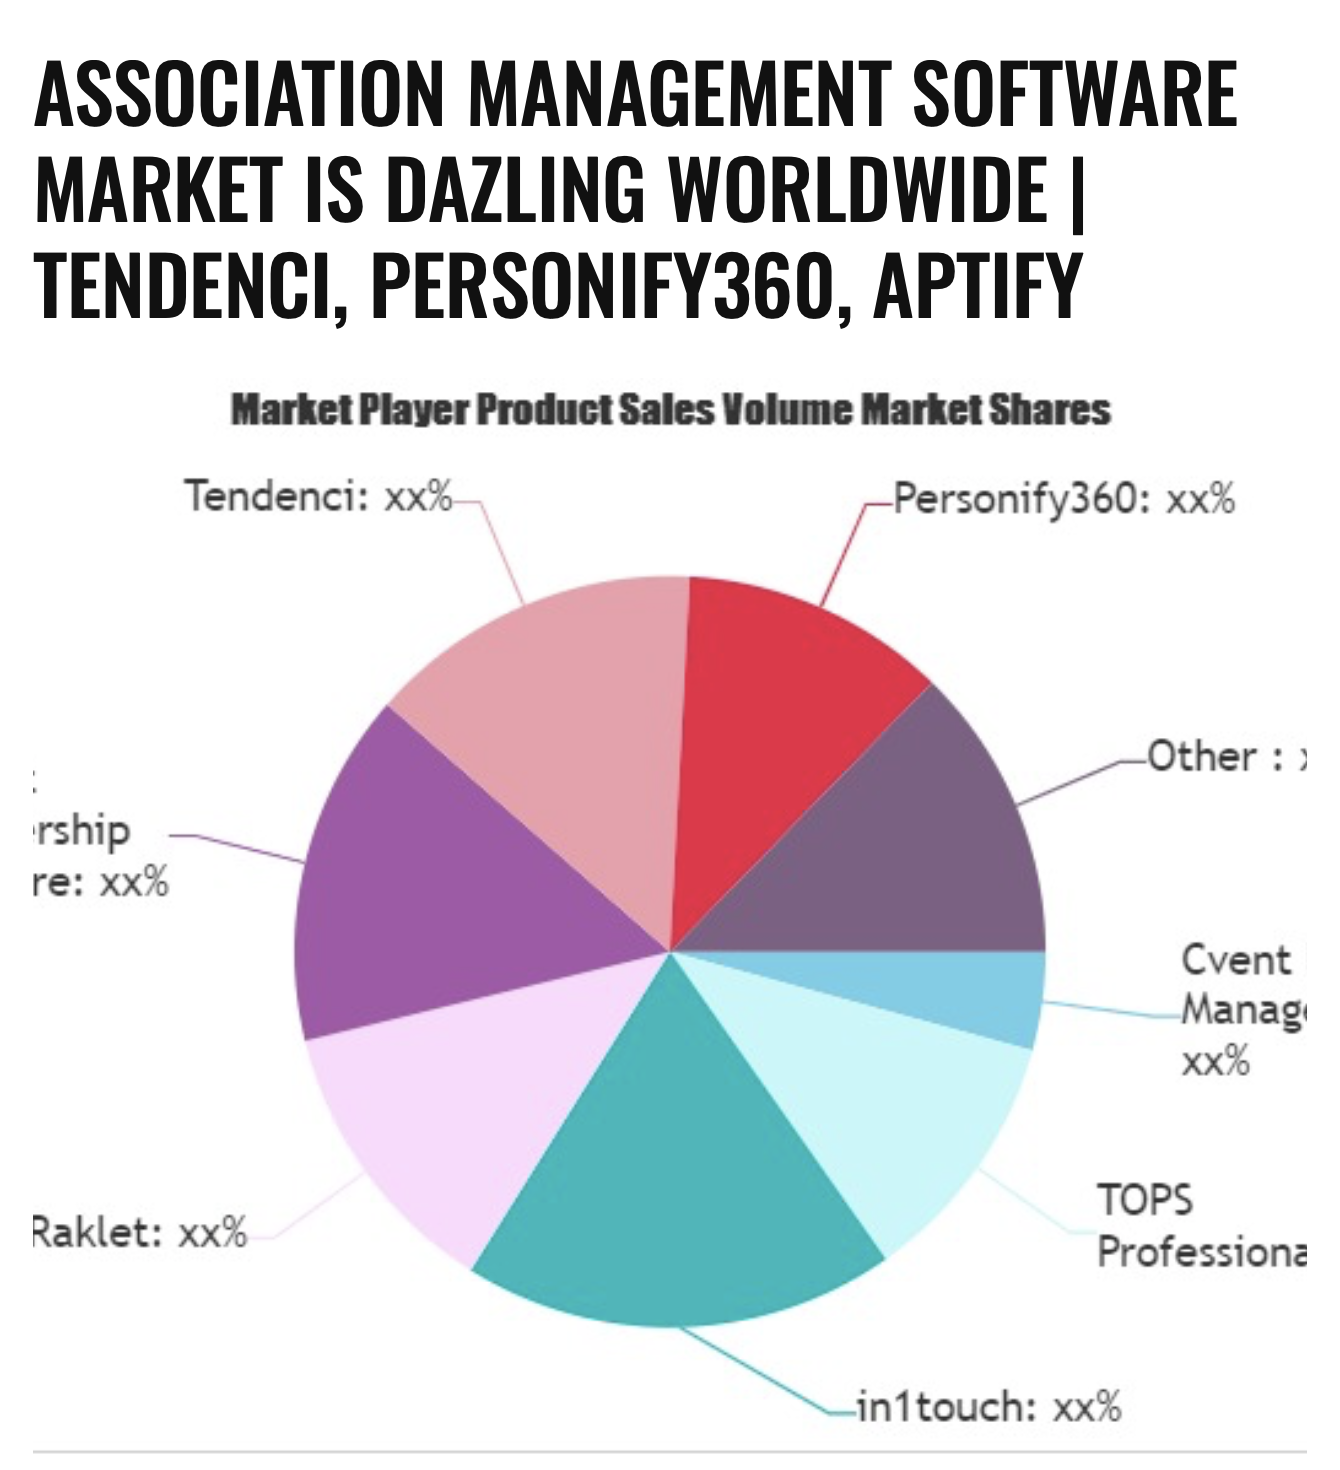 Tendenci AMS Software Market Projection Continues to Thrive Worldwide